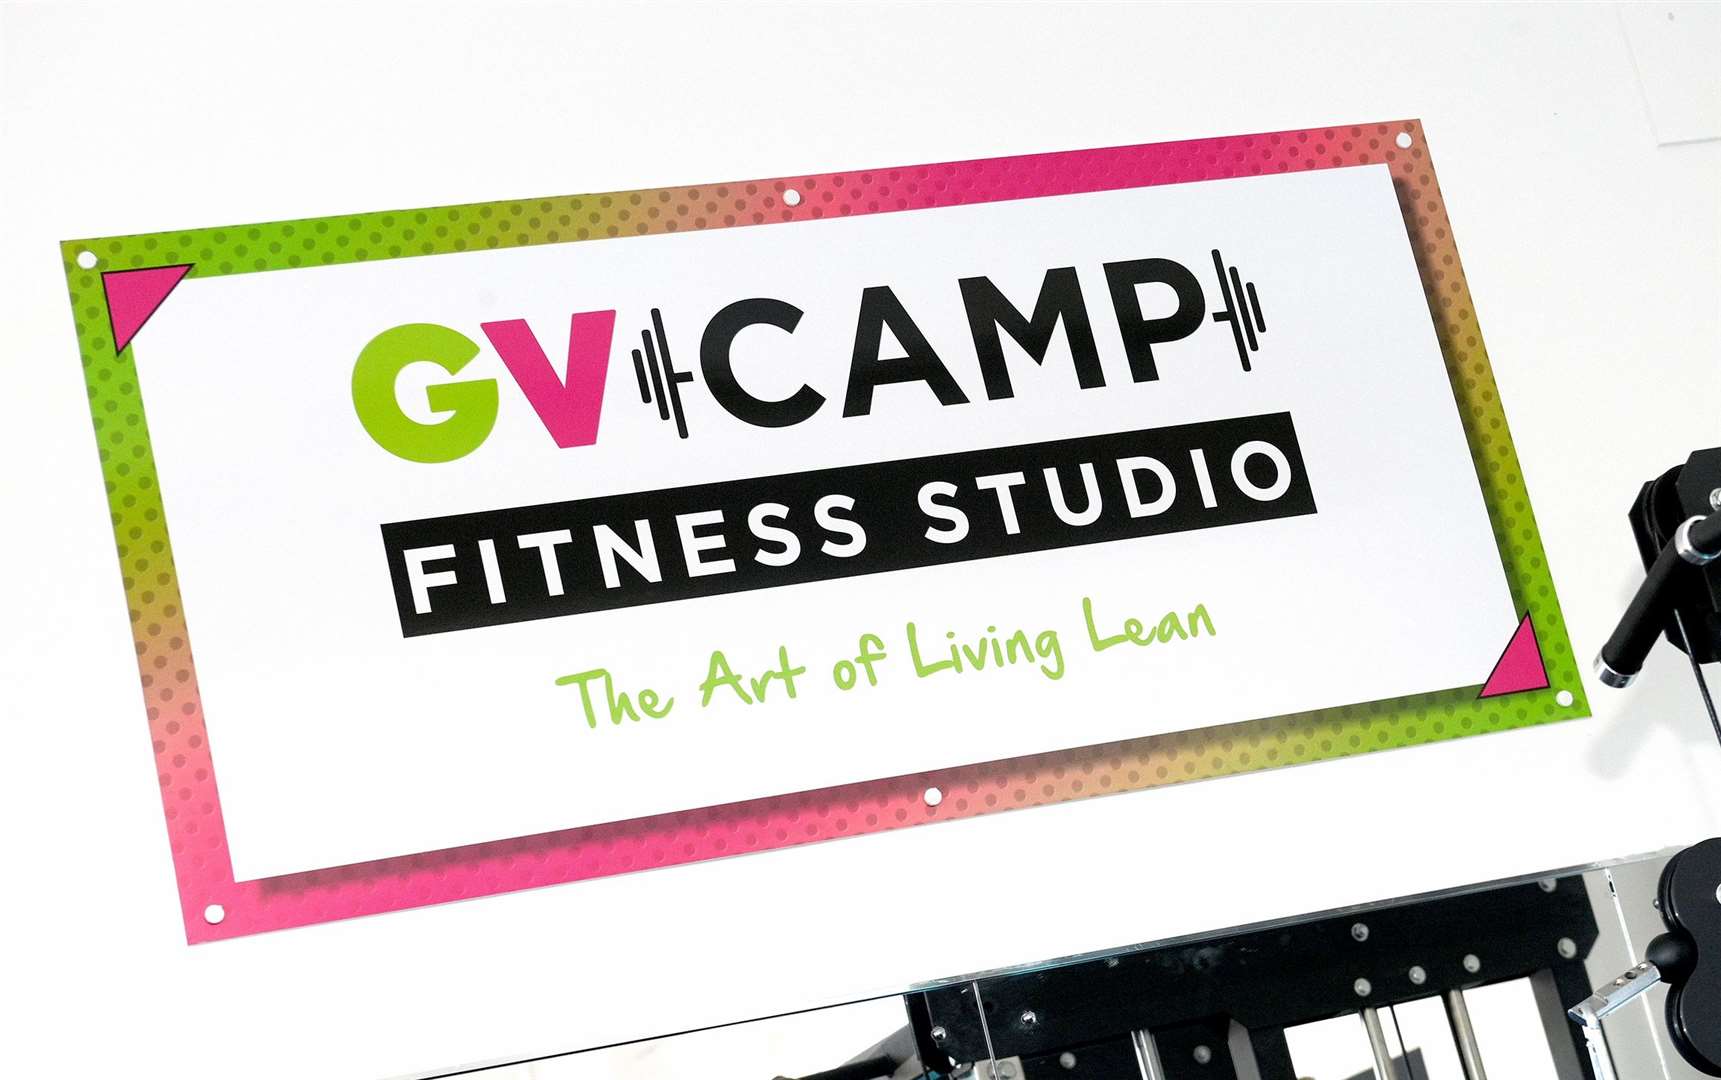 The GV Camp Fitness Studio, which opened on Saturday, is an expansion of Pete Gardner’s highly-popular The Gym Van business. Picture: Mecha Morton